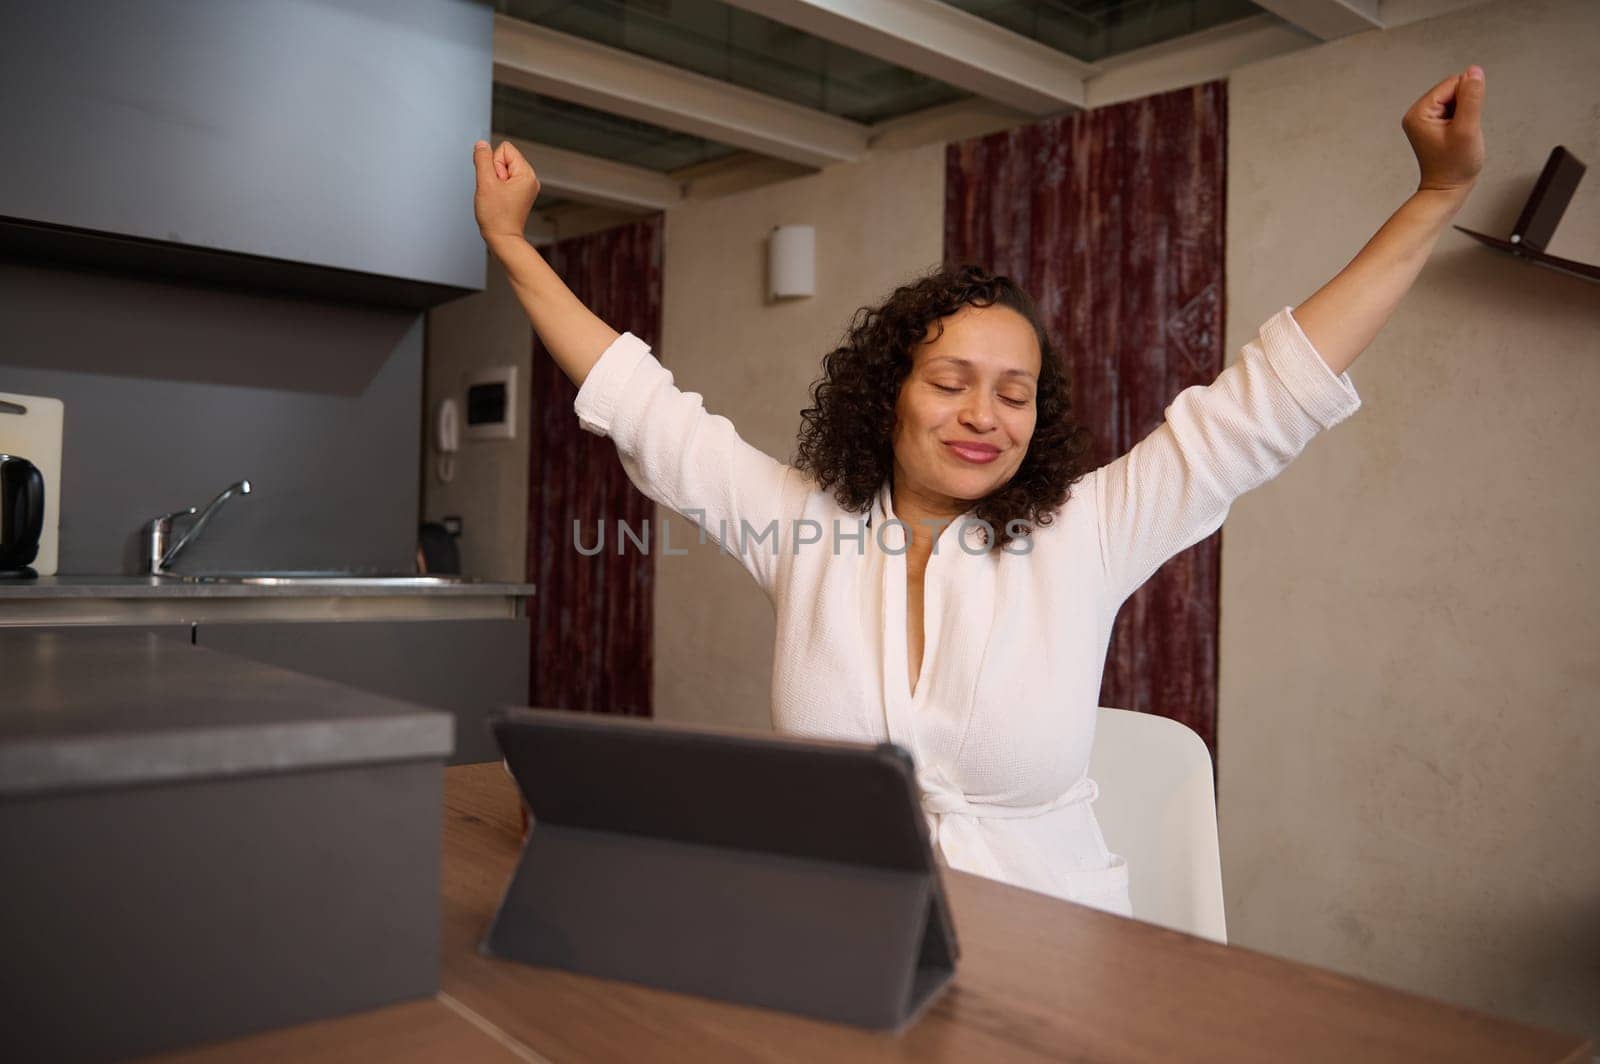 Charming young woman smiling stretching up after waking up in the morning, sitting at table with a digital tablet. People. Morning routine. Lifestyle. Online communication and business. Remote job